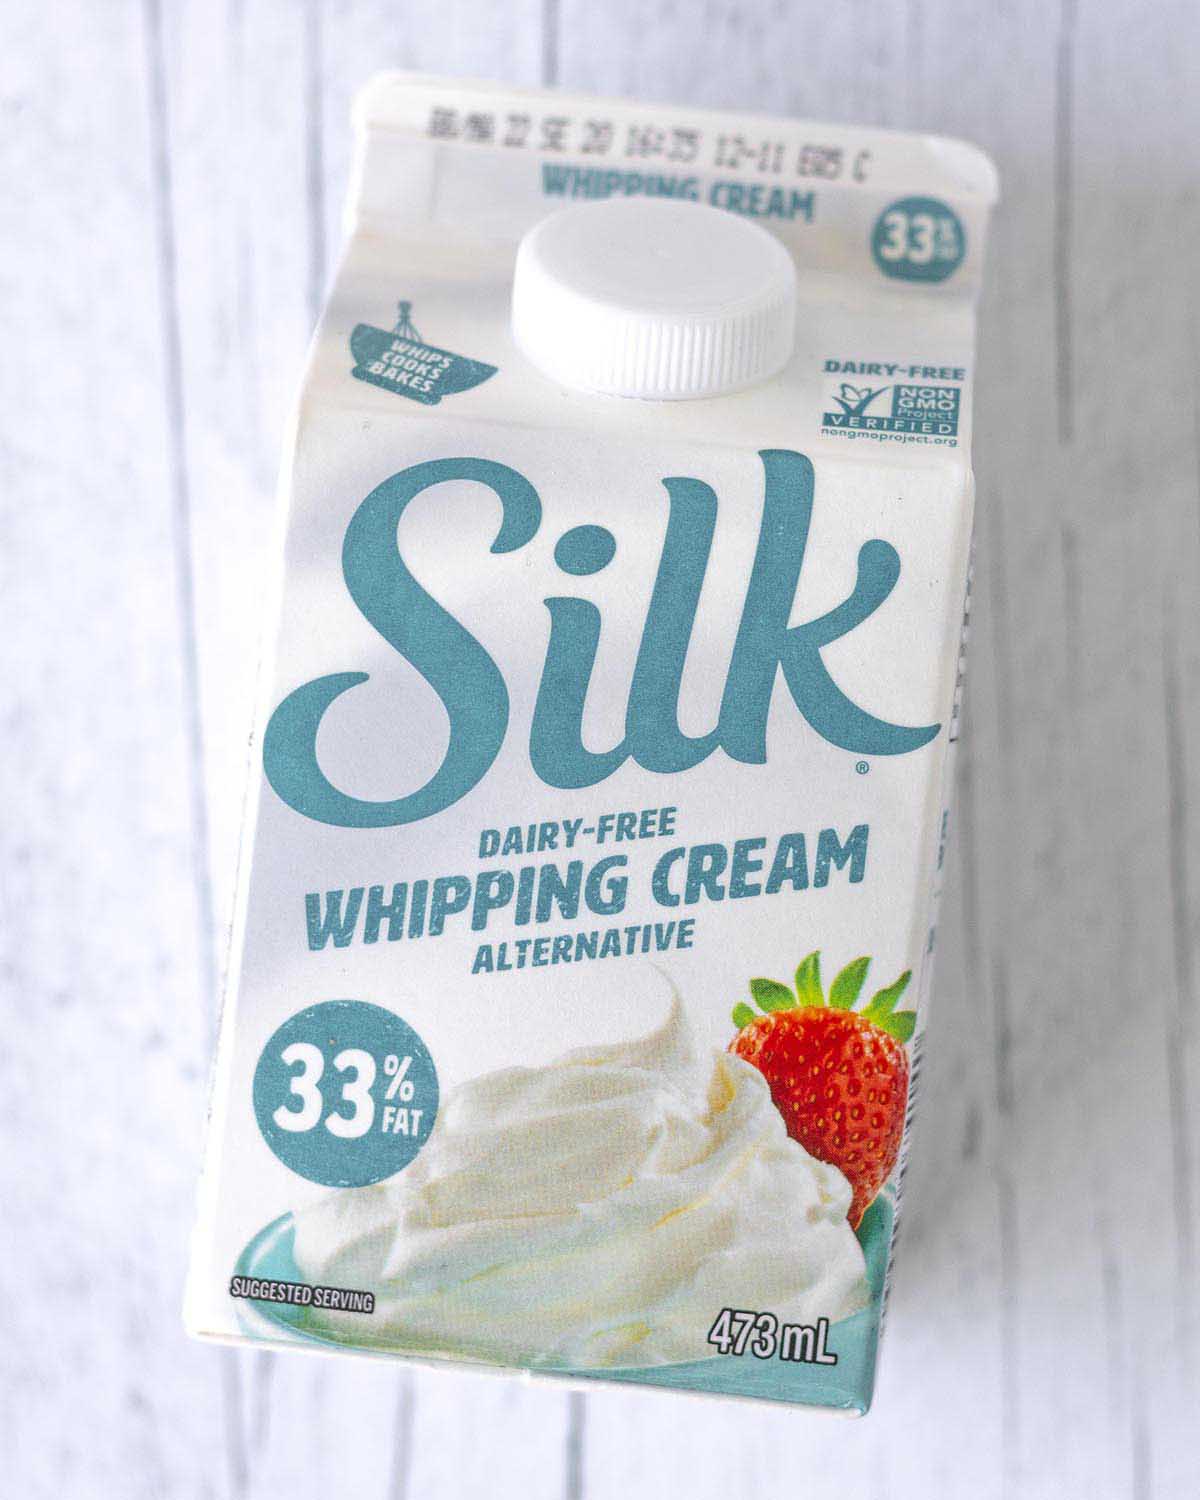 An overhead shot showing a small carton of Silk brand dairy-free whipping cream alternative.